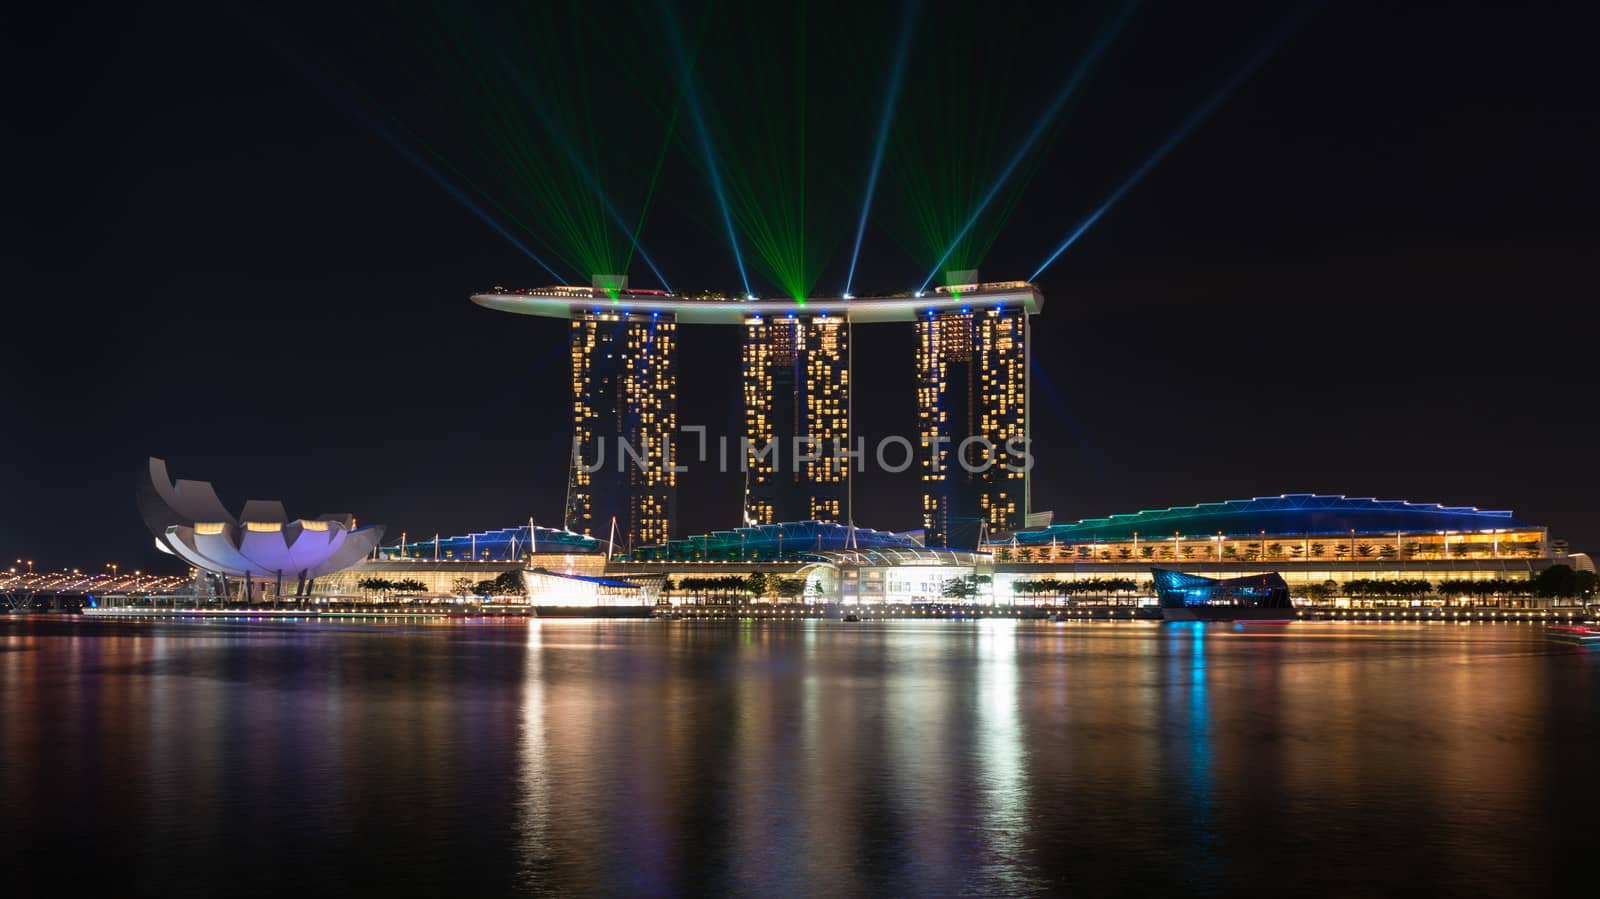 SINGAPORE - JUN 1: Laser show on Marina Bay Sands complex skyline at night on Jun 1, 2013 in Singapore. It is an integrated resort became a  symbol of modern Singapore.